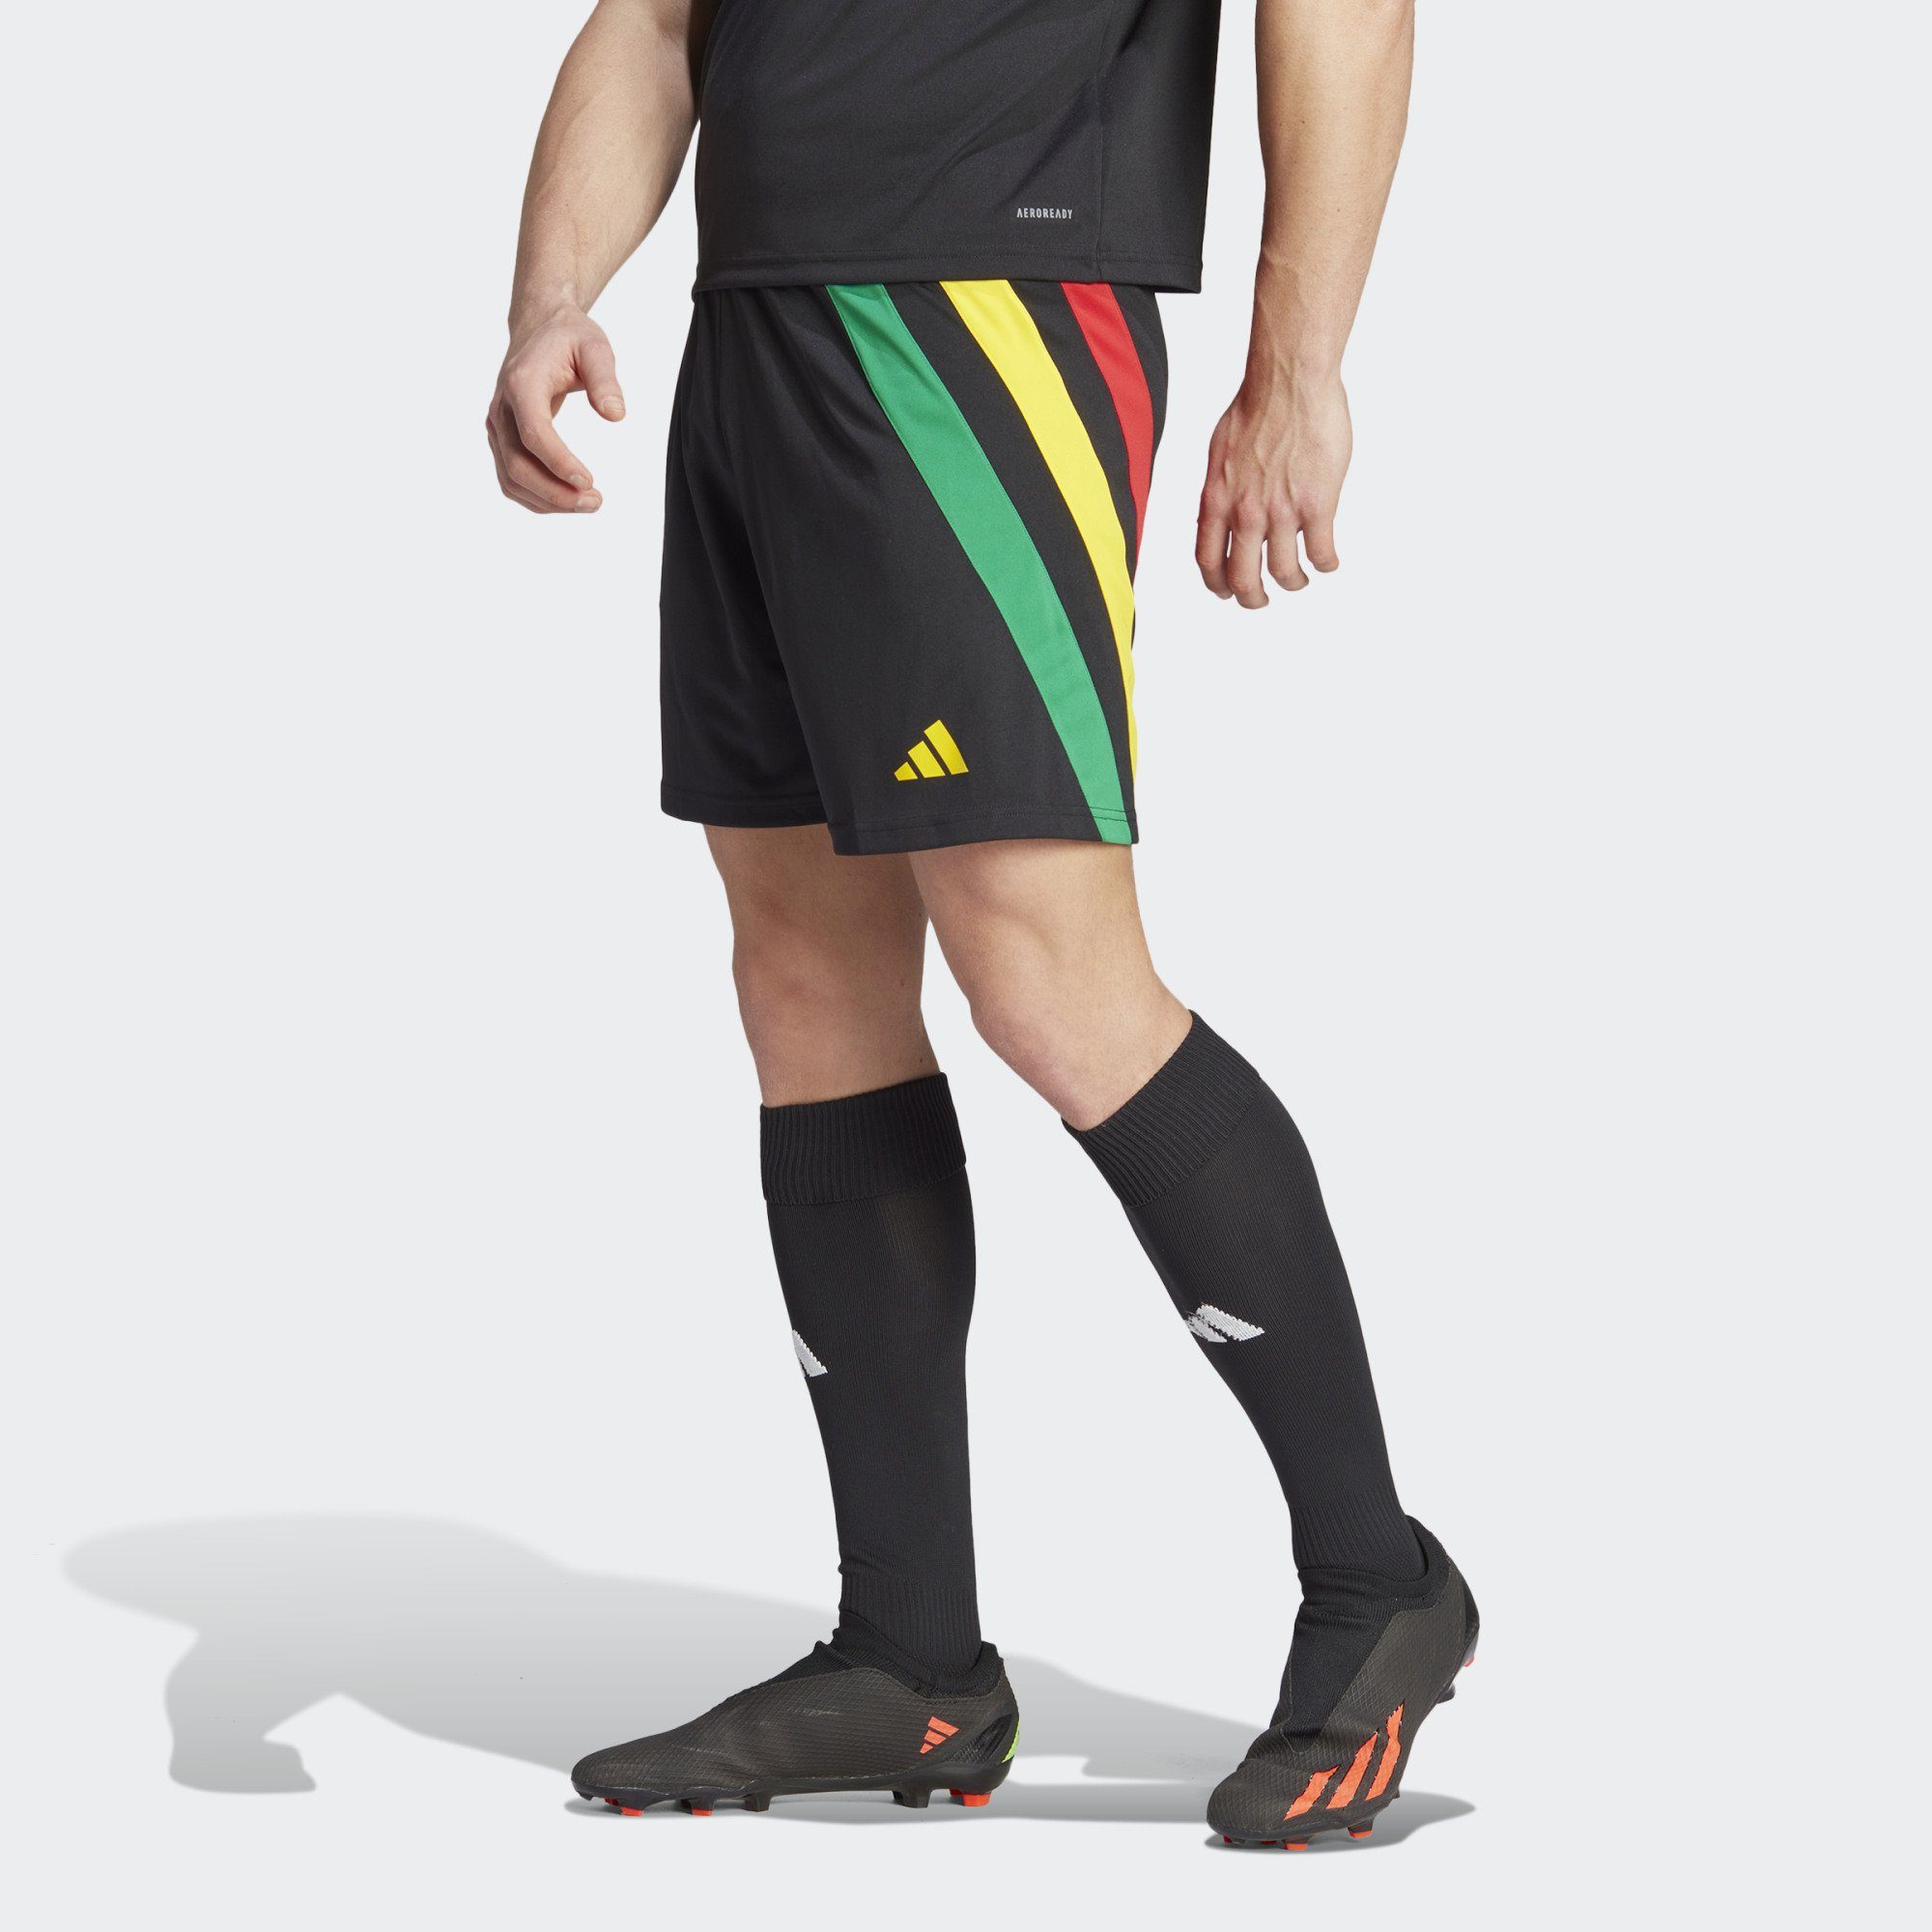 adidas Performance Funktionsshorts FORTORE 23 SHORTS Black / Team Collegiate Red / Team Yellow / Team Green